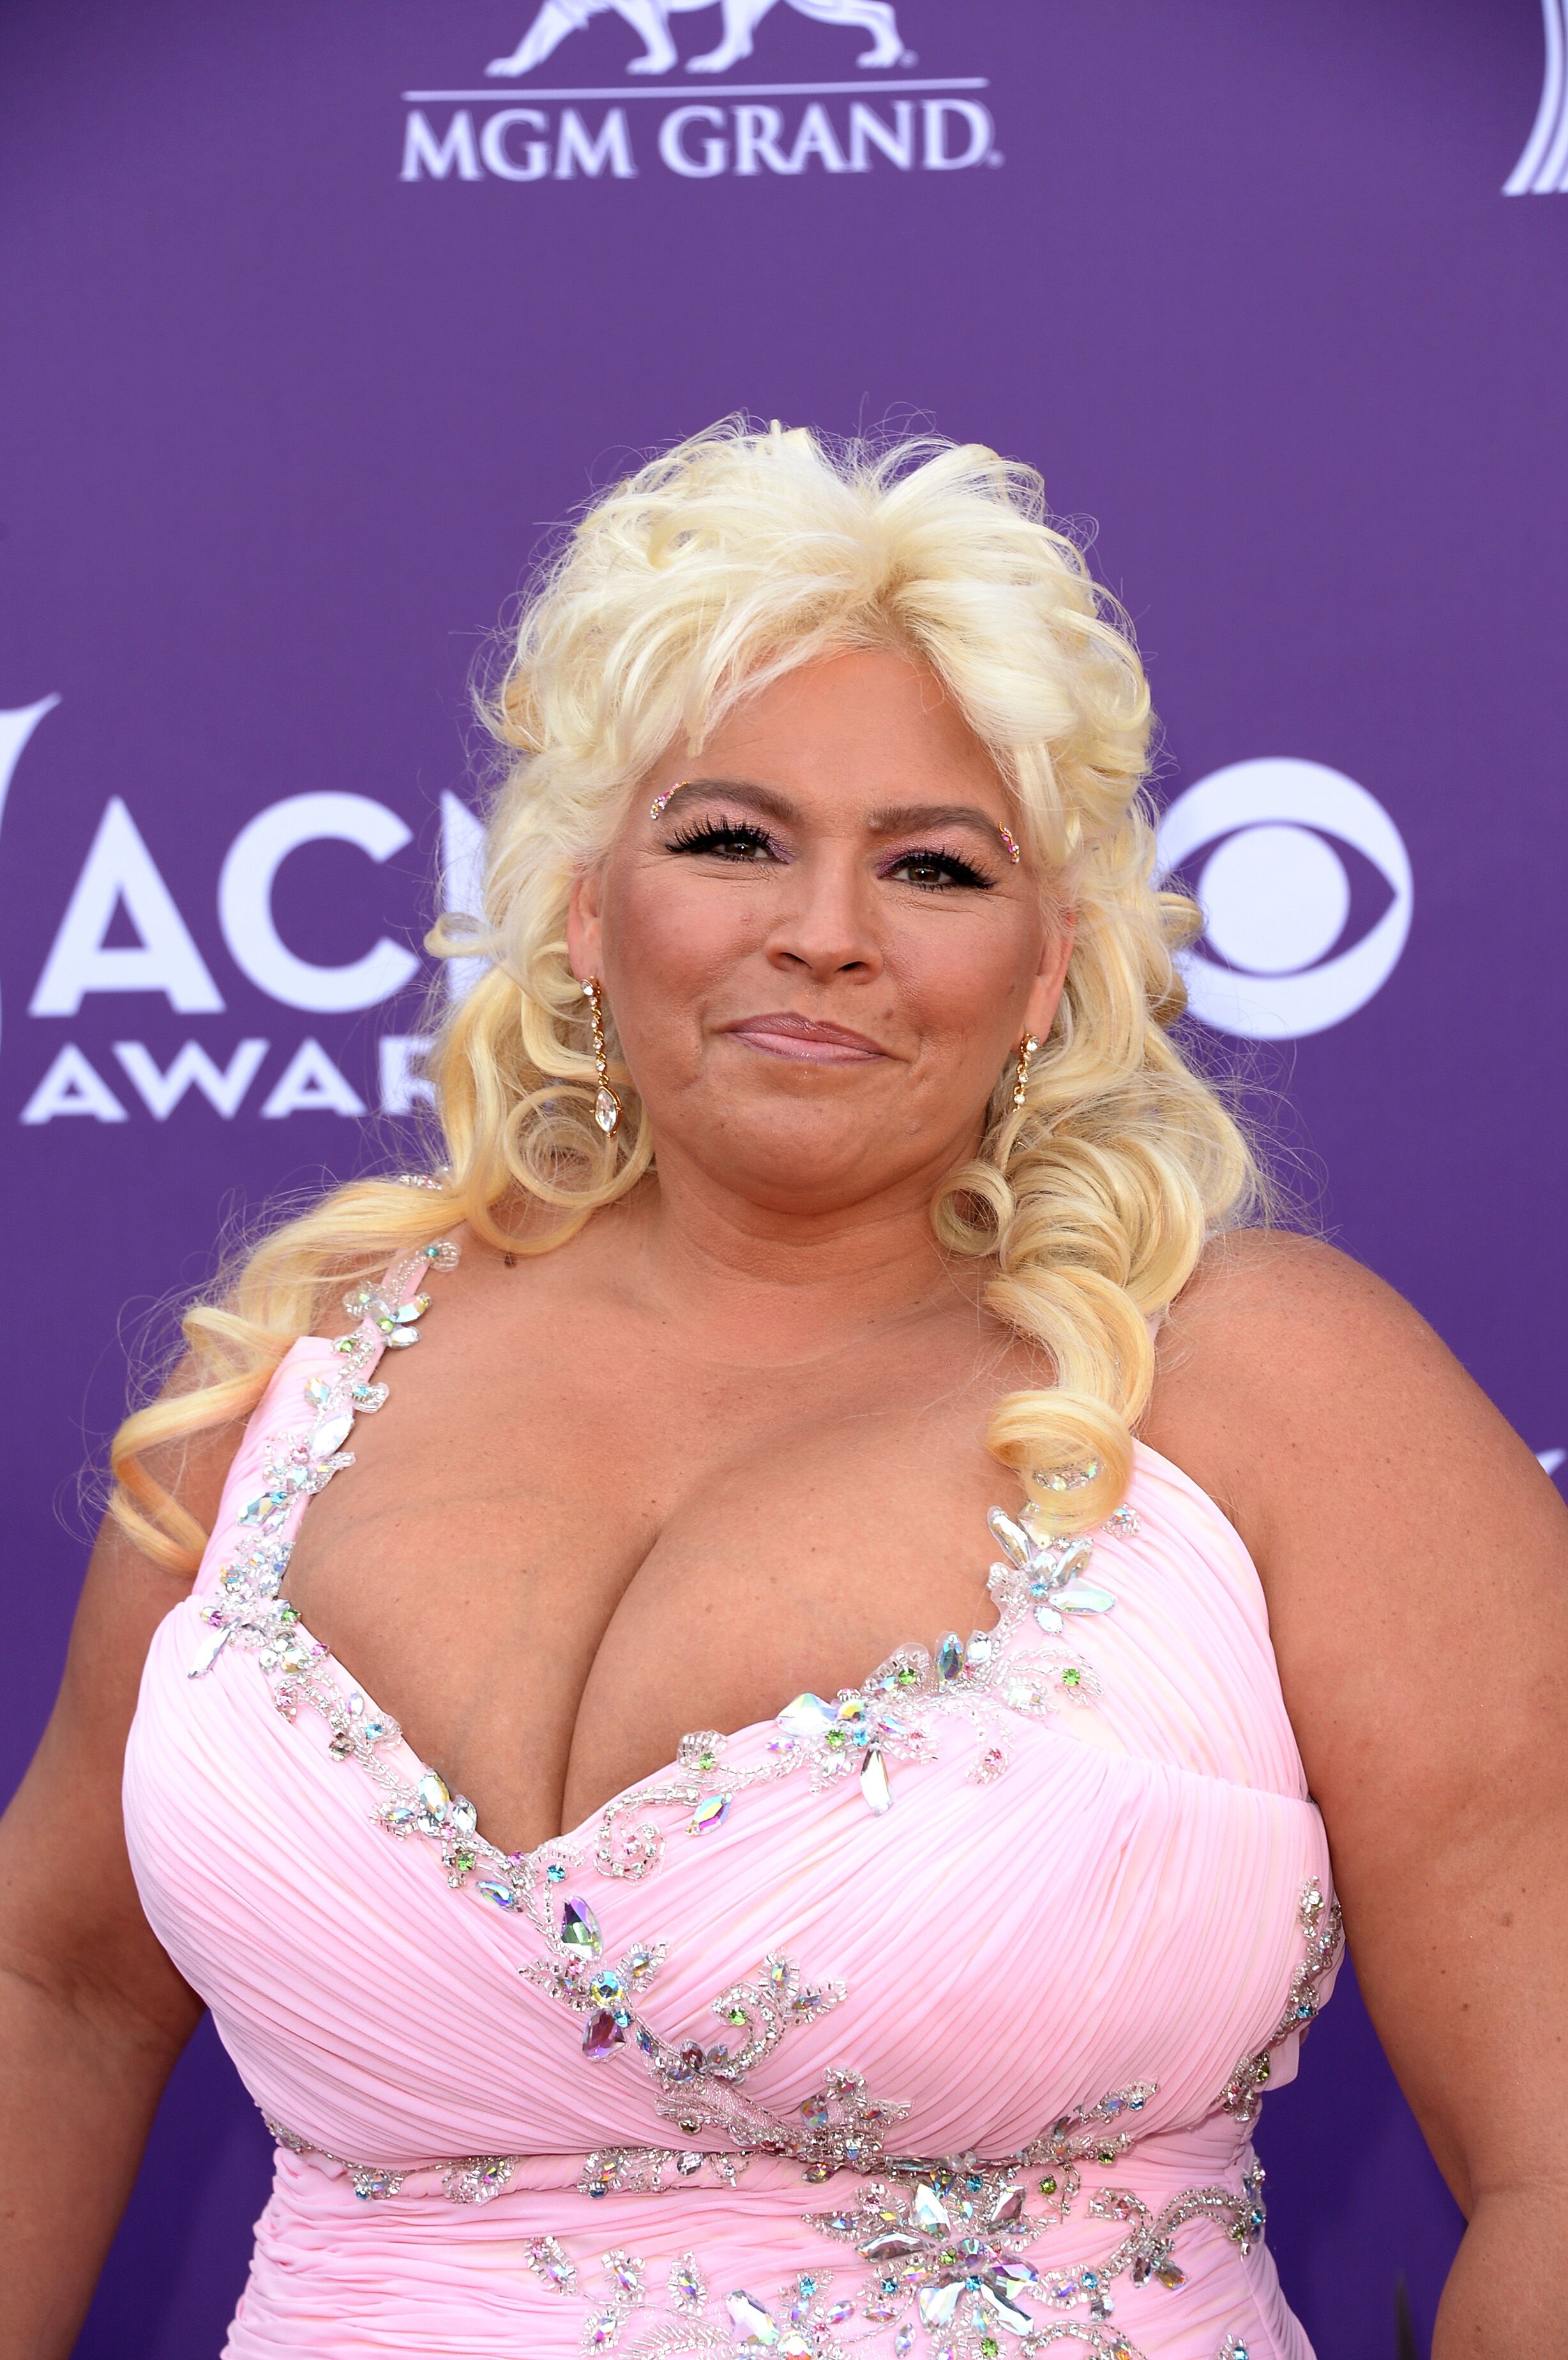 TV personality Beth Chapman arrives at the 48th Annual Academy of Country Music Awards at the MGM Grand Garden Arena on April 7, 2013 in Las Vegas, Nevada | Photo: Getty Images